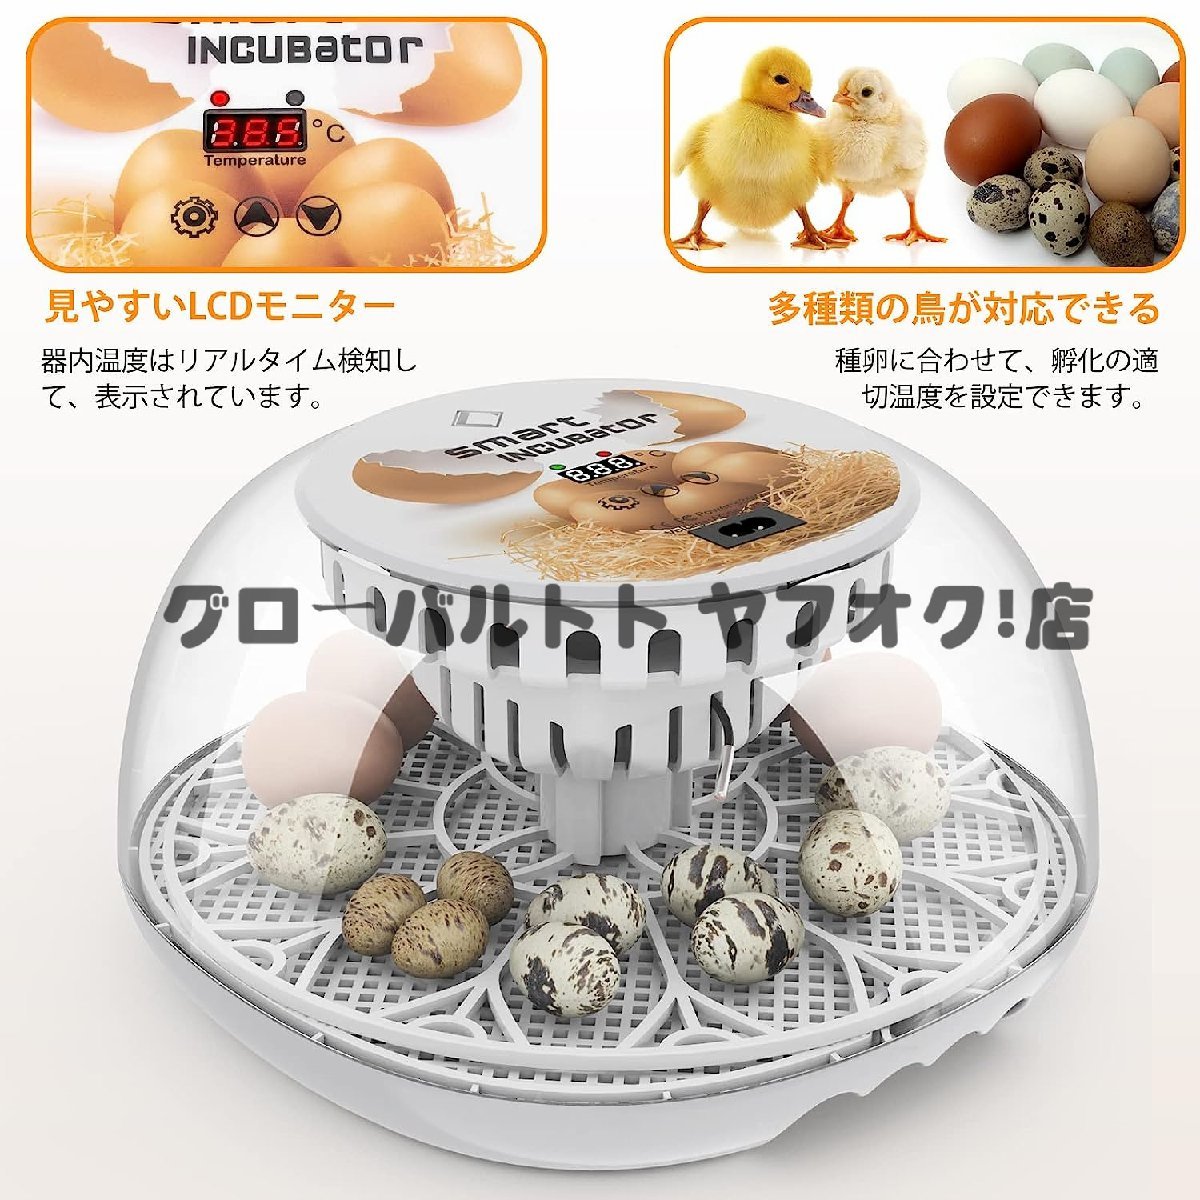  popular recommendation automatic . egg vessel in kyu Beta - birds exclusive use automatic rotation egg type a Hill goose ... chicken etc. house .. egg vessel 12 piece insertion egg possibility child education for home use S894